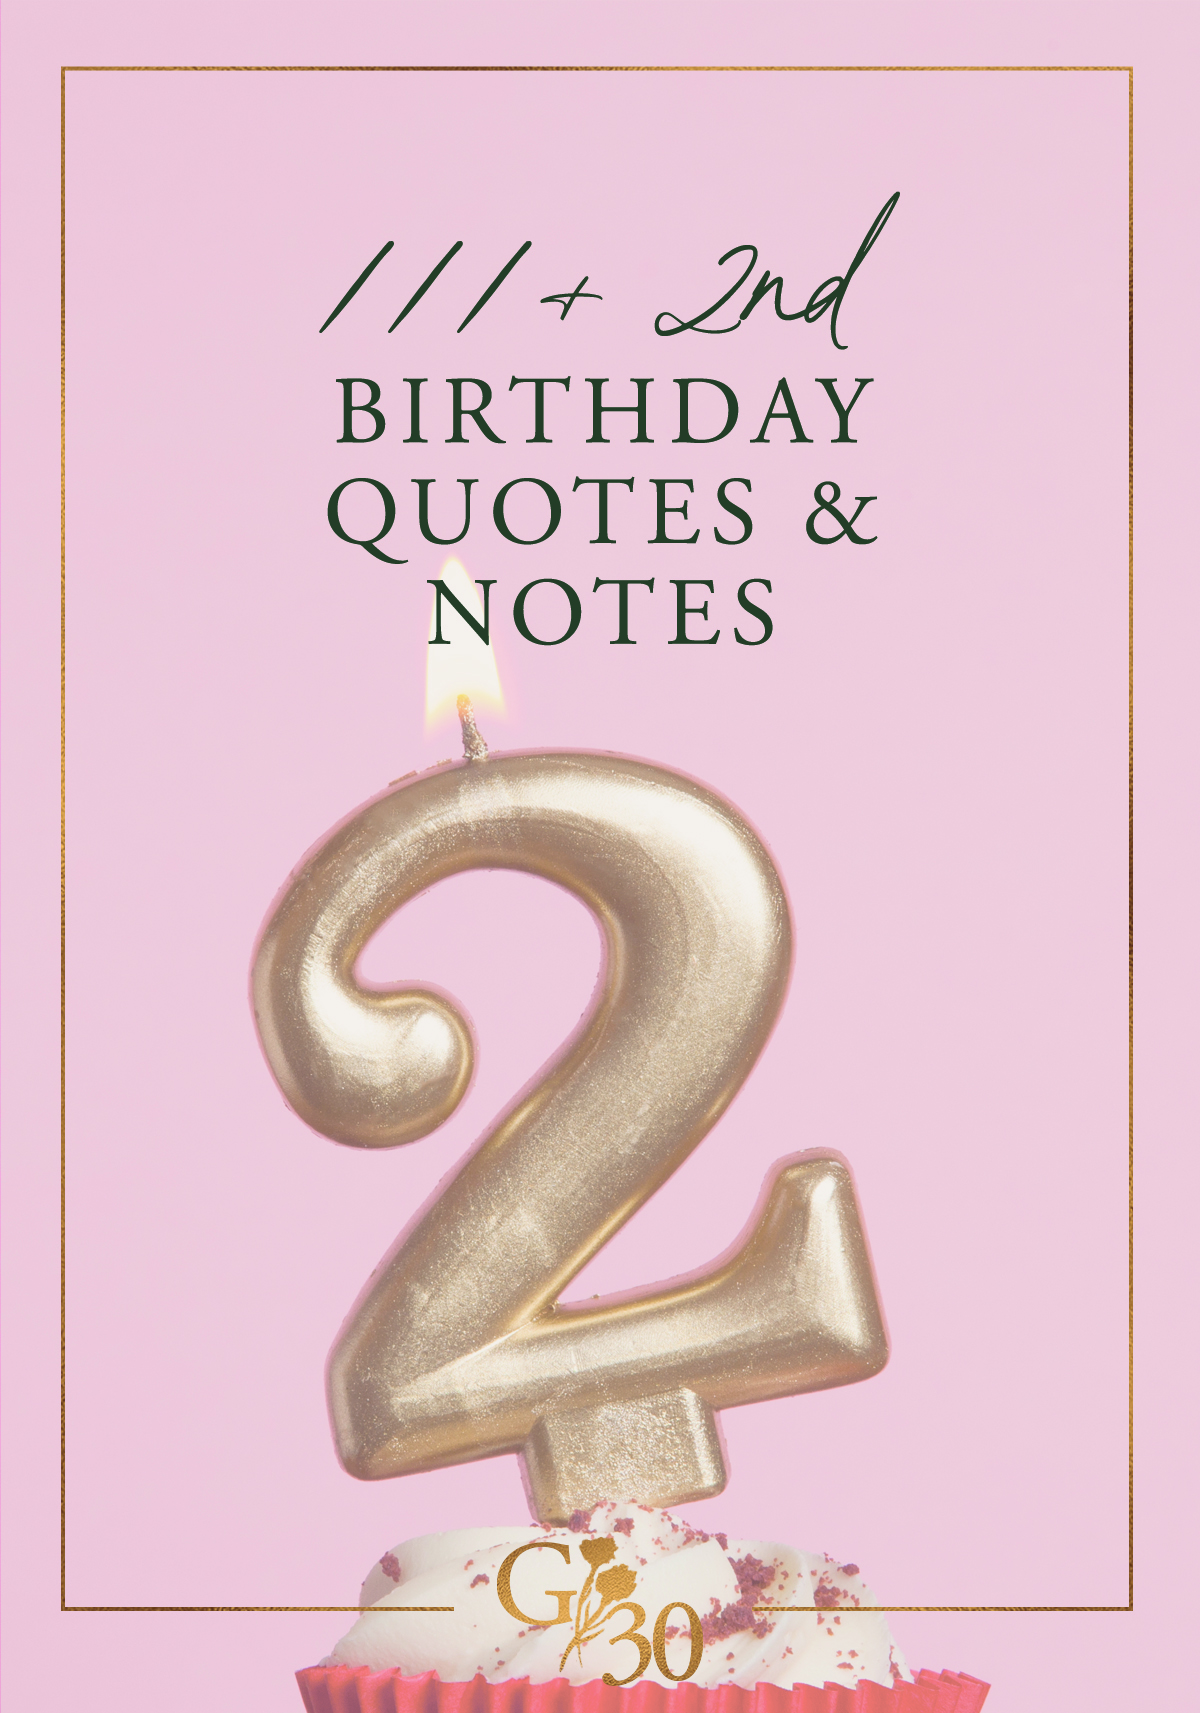 111+ 2 Year Old Birthday Quotes - GenThirty